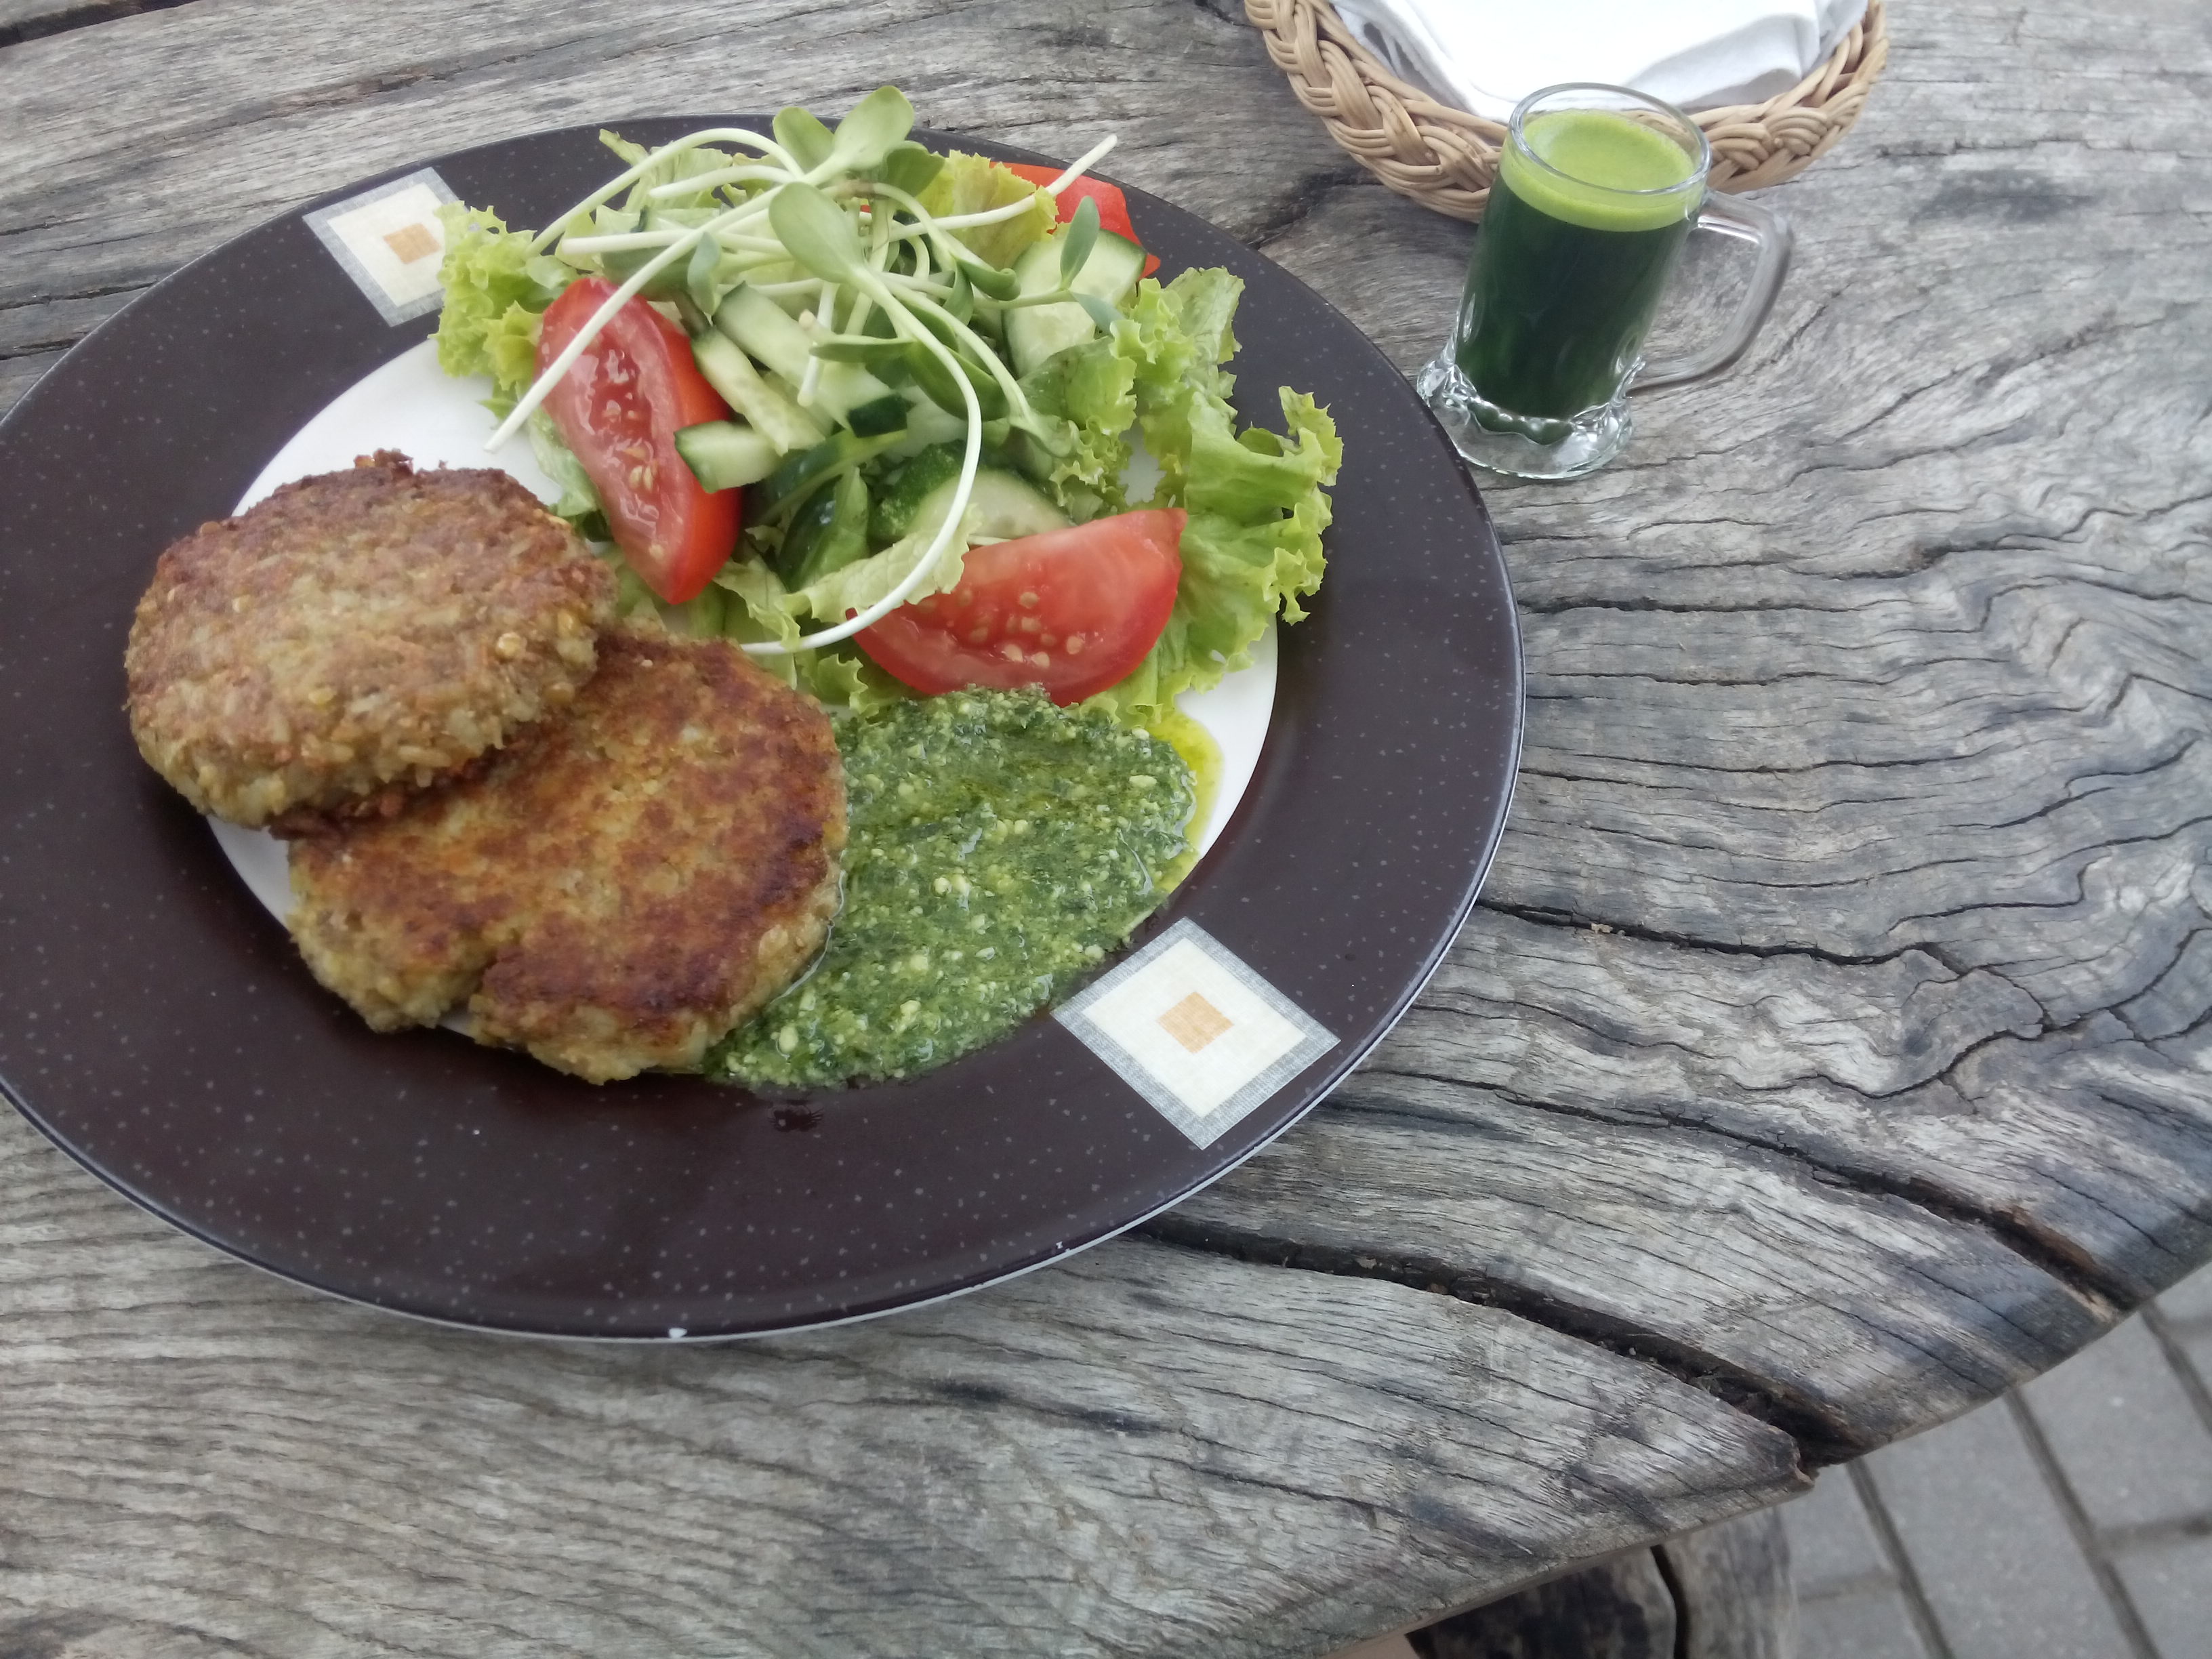 A plate on a rough wooden table holds round lentil patties and salad